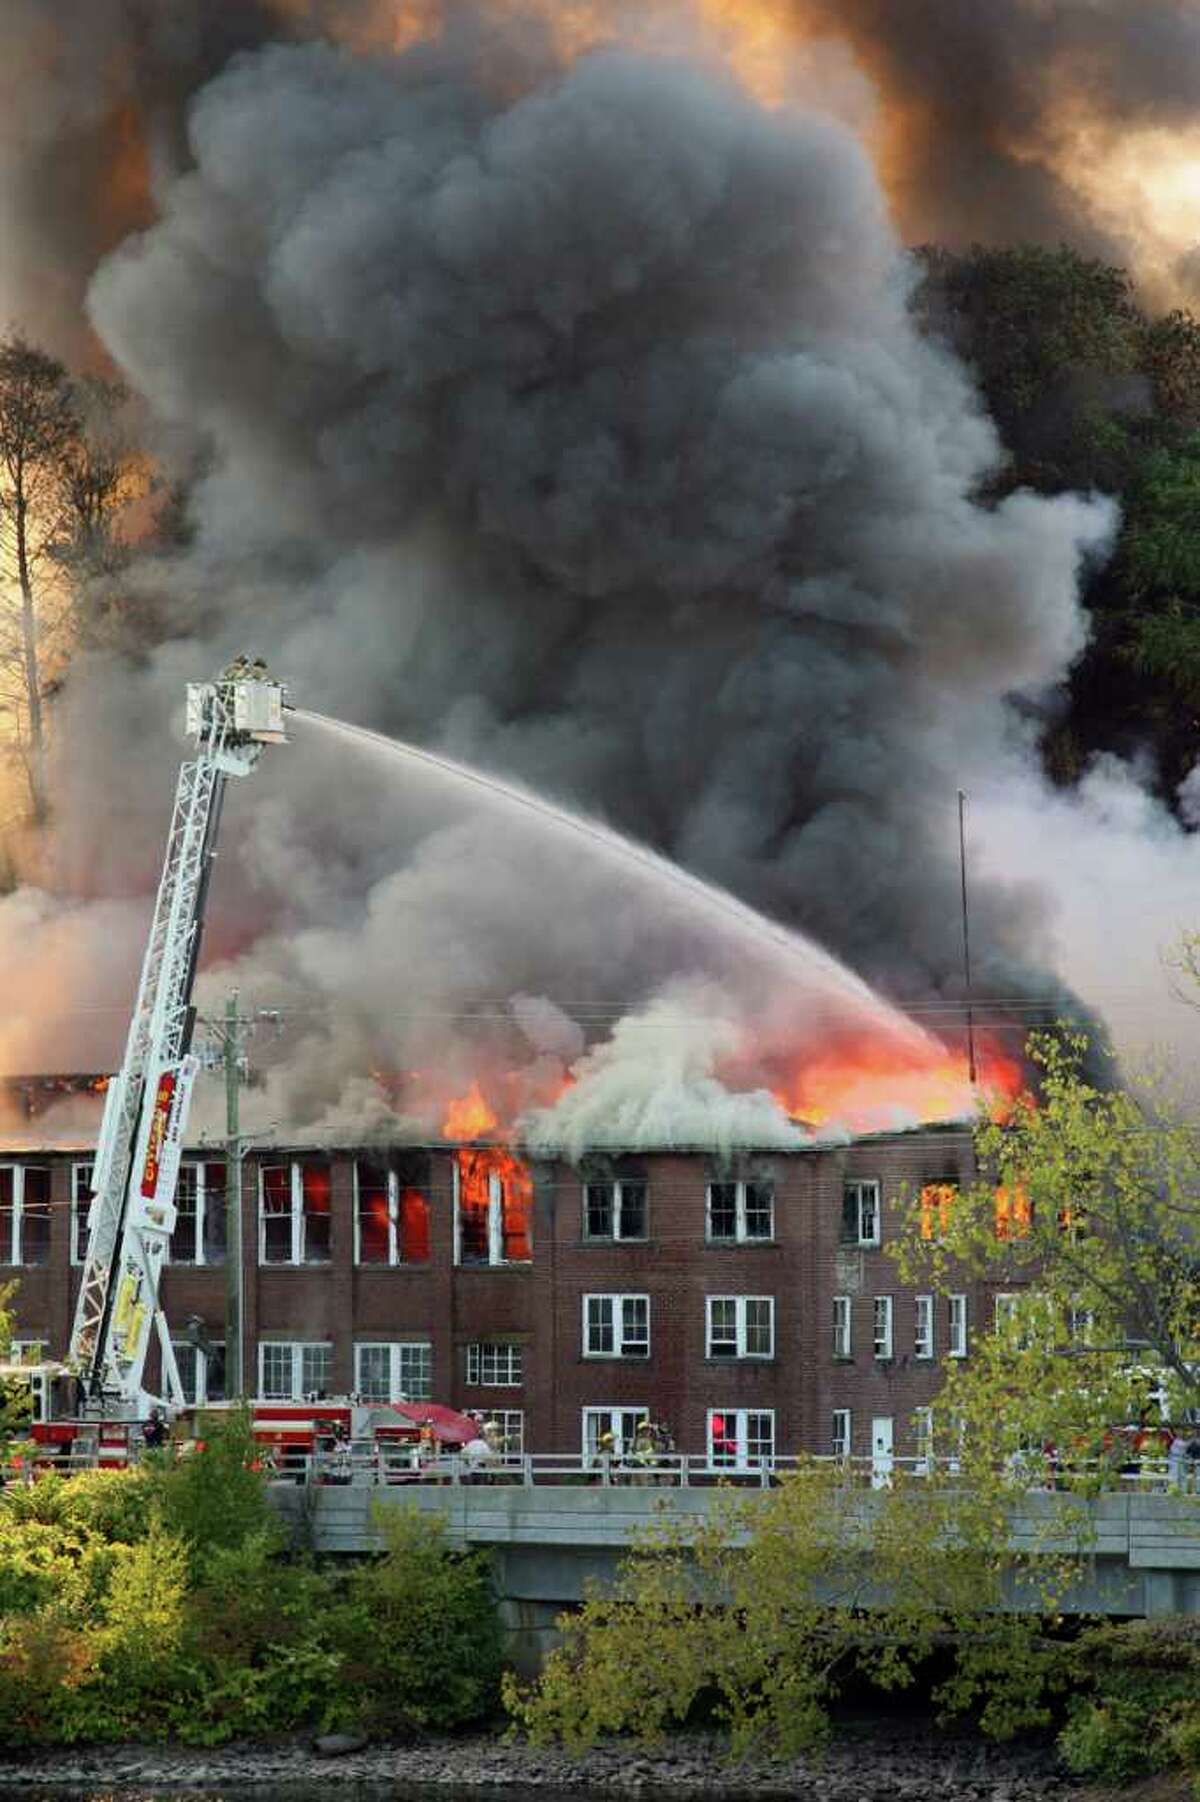 A raging fire ravaged the vacant Housatonic Wire factory complex on River Street. Sept. 11, 2010 Fire destroys the Housatonic Wire complex in Seymour. The building was slated to be the site of a new development. Read more.